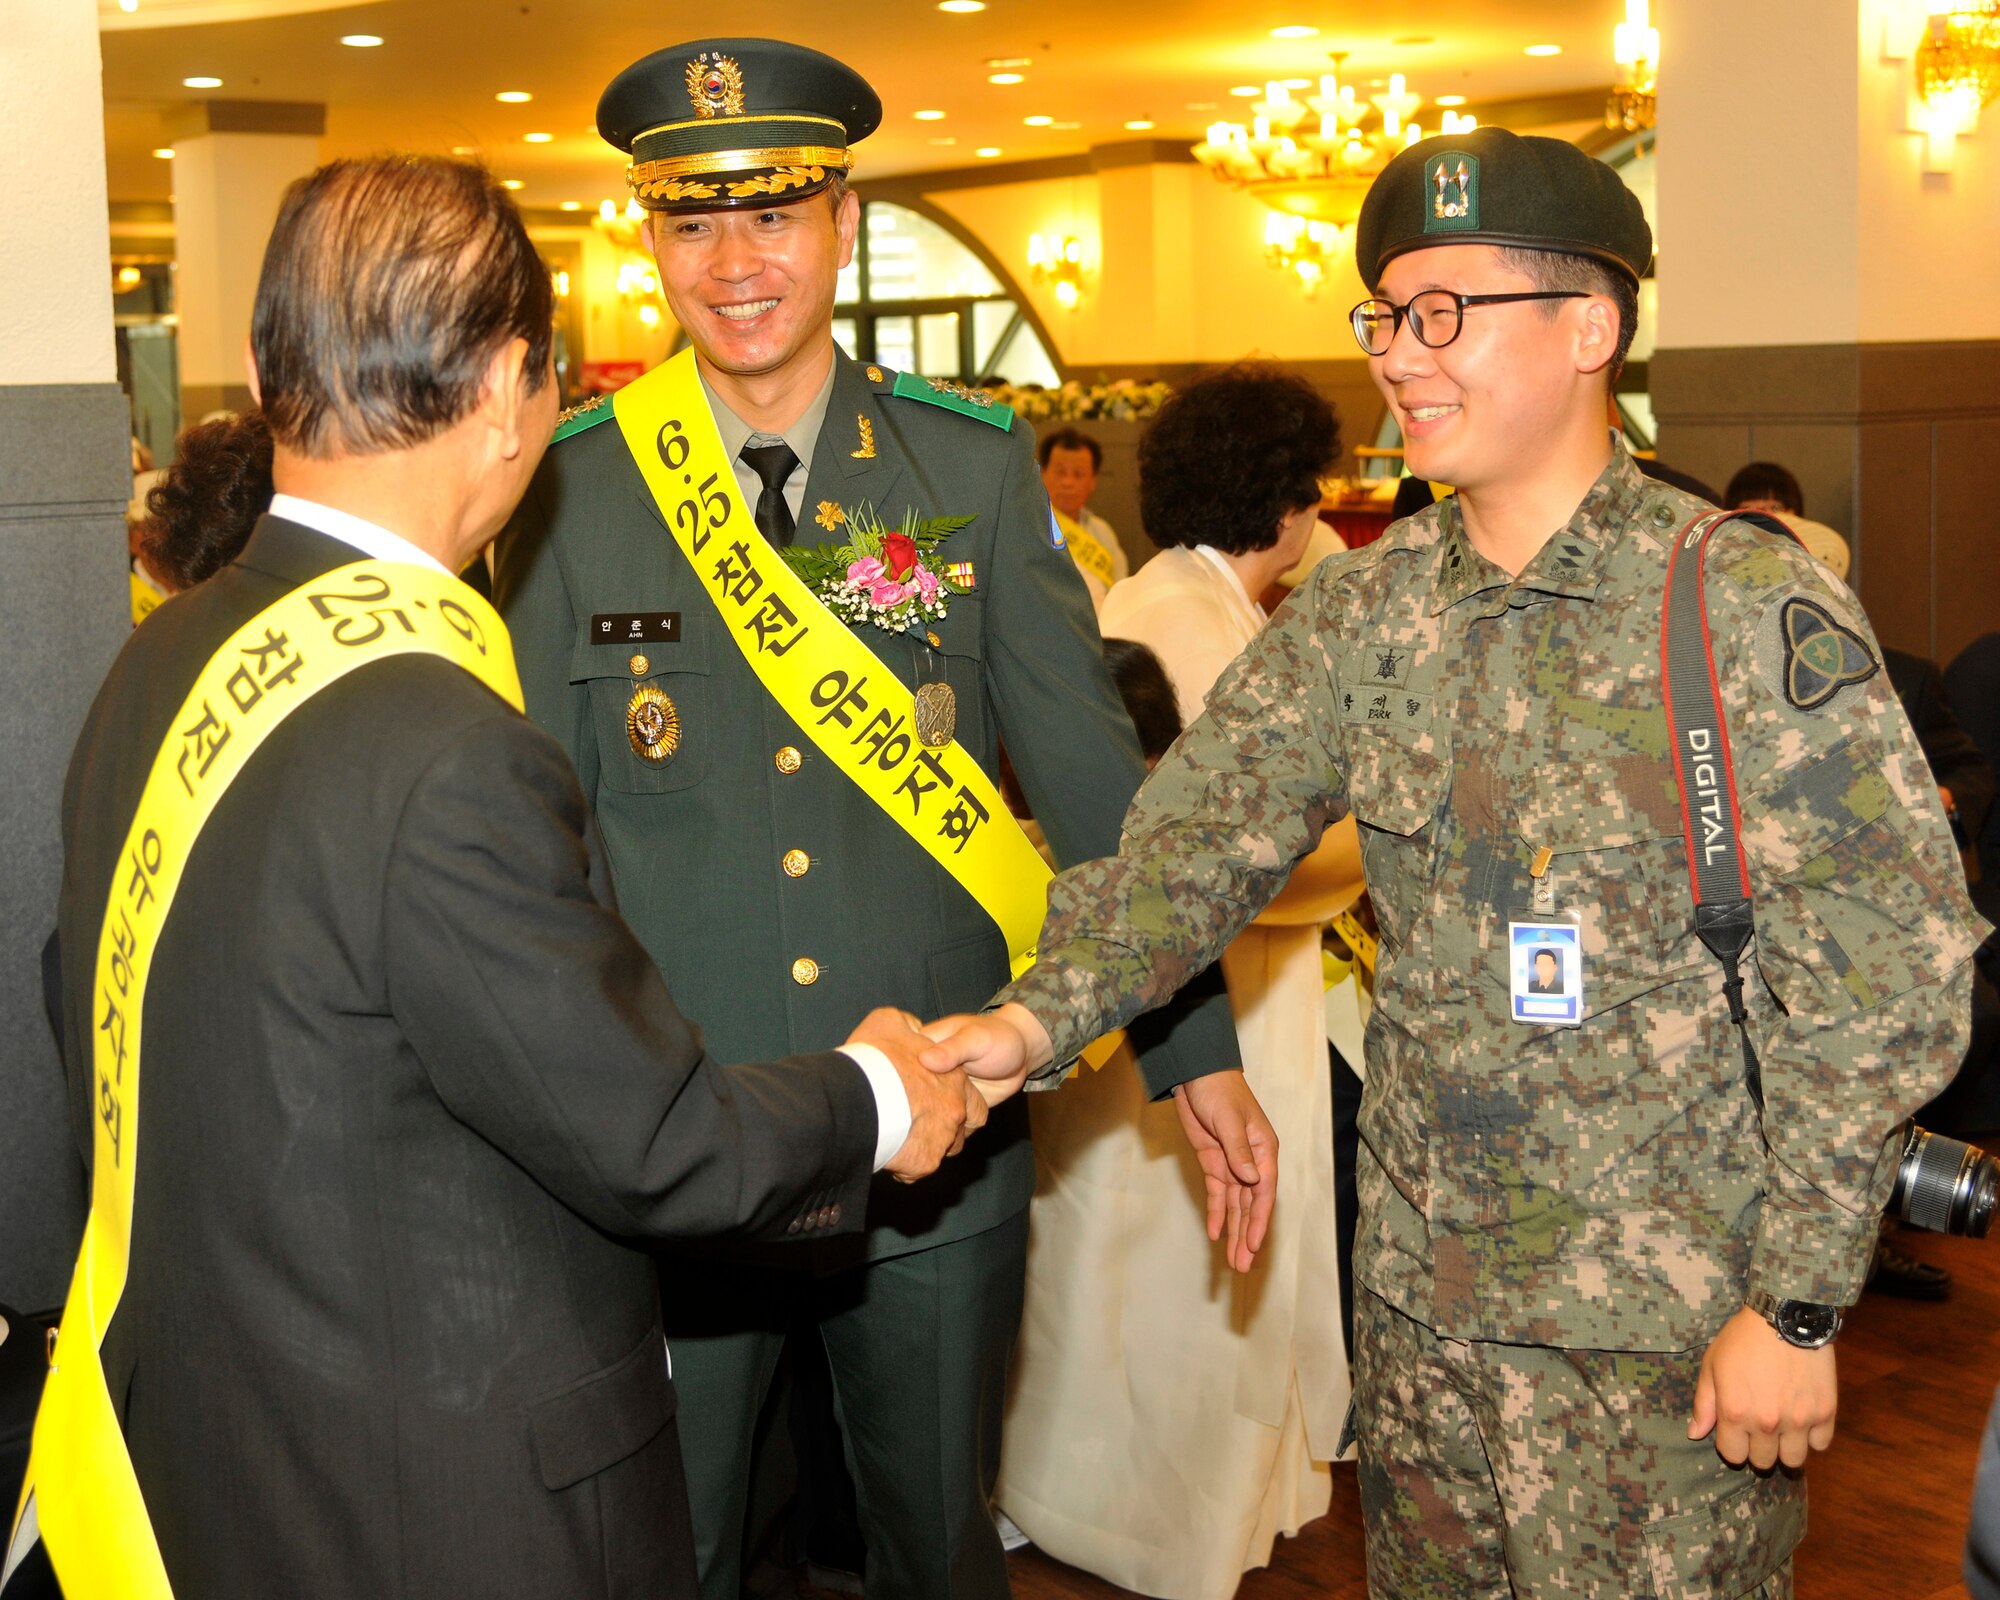 Dong-Shin Moon, left, shakes hands with the Republic of Korea Air Force photographer who documented the Korea War memorial ceremony in Gunsan City, Republic of Korea, June 25, 2012. More than 60 years ago, the United States and South Korea began fighting against North Korea and continue to remain allies. (U.S. Air Force photo/Senior Airman Marcus Morris)